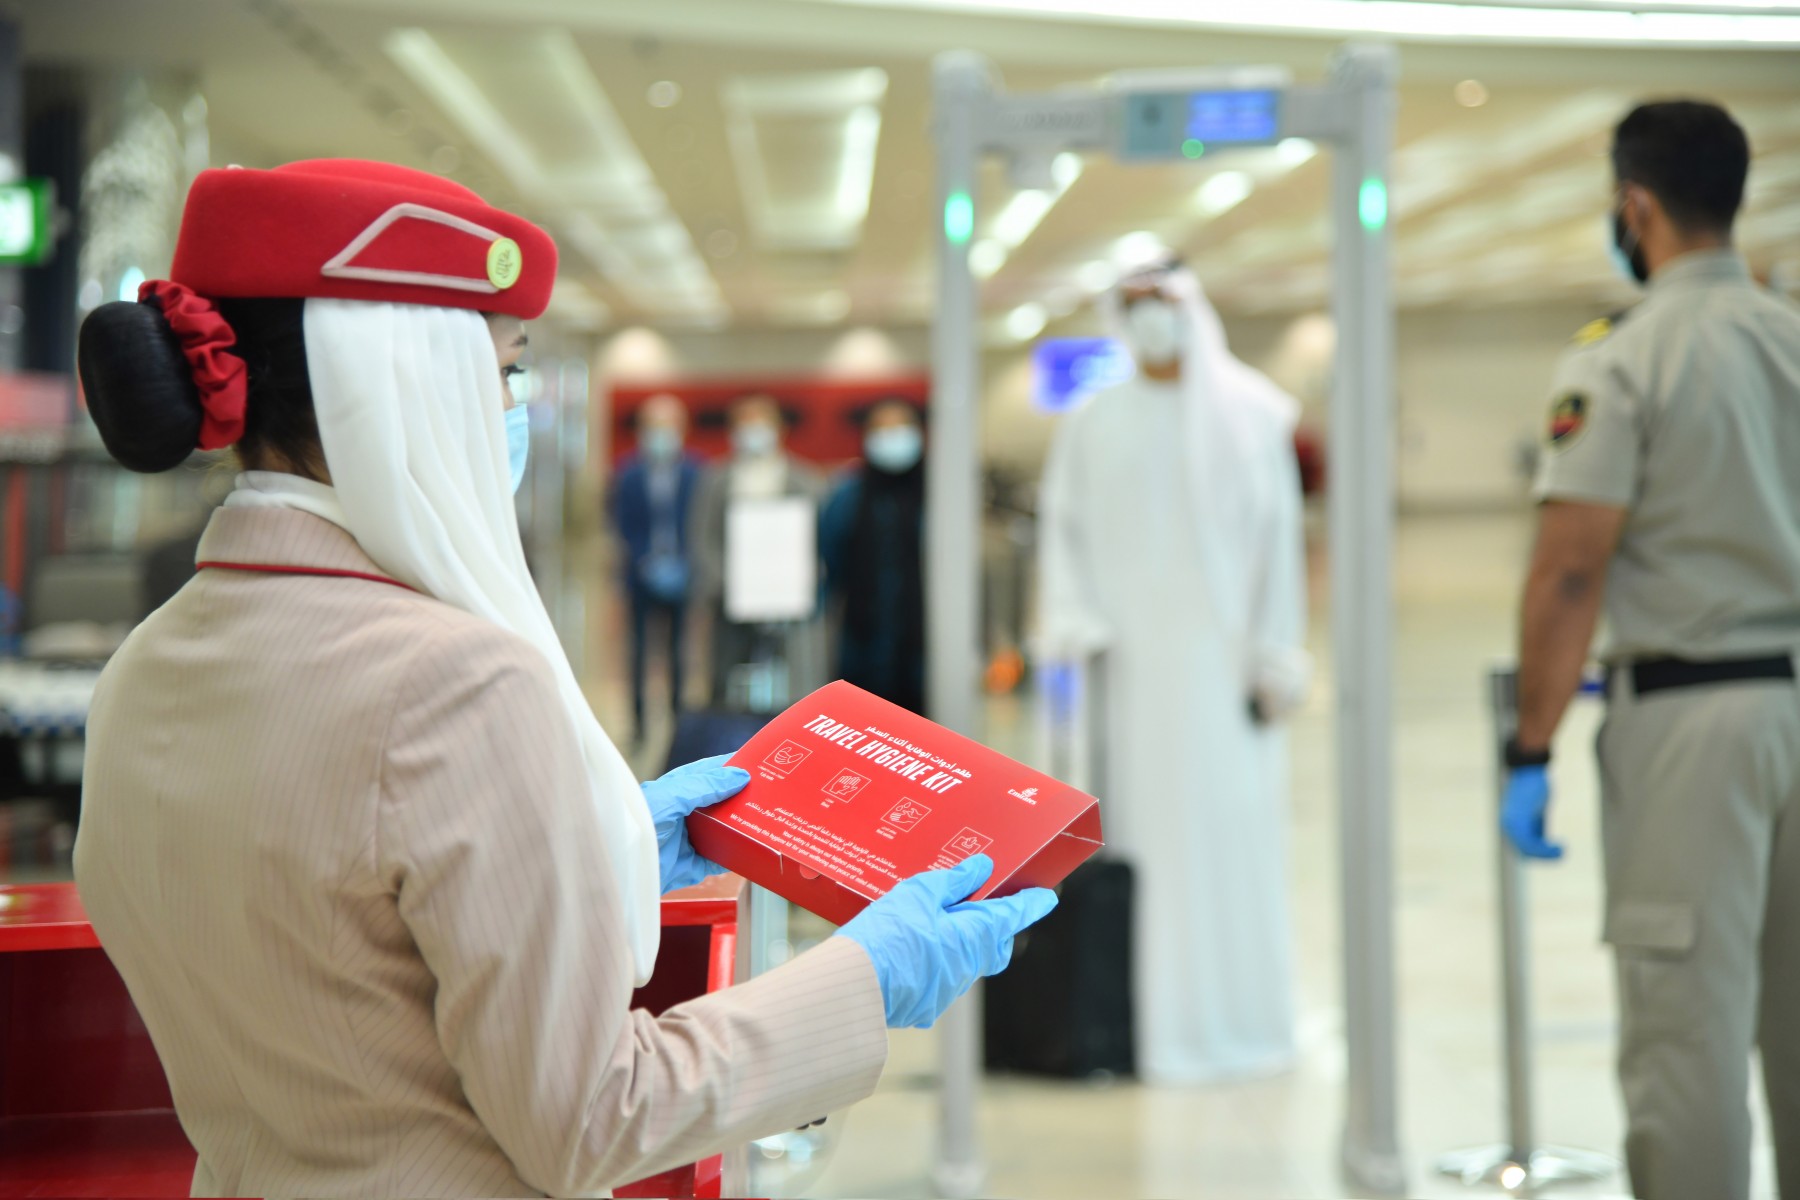 Emirates sets industry leading safety standard for customers travelling as it resumes operations